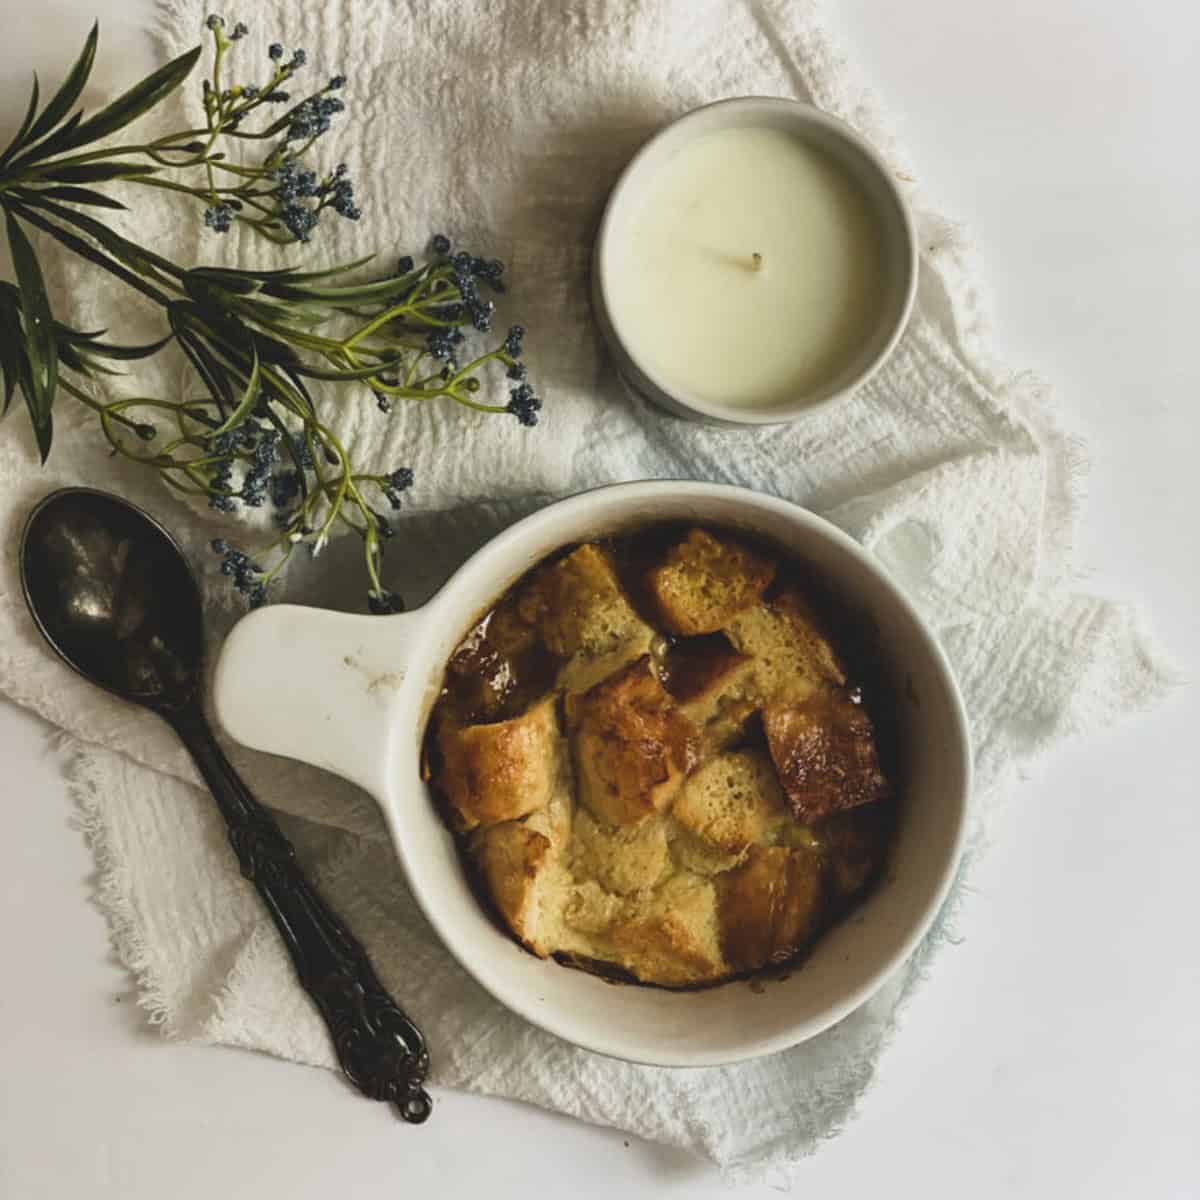 A bowl of bread pudding on a white napkin. The bread pudding is light brown and sits in a white bowl.
A white spoon rests on the edge of the bowl.
To the right of the bowl is a white mug filled with milk.
To the left of the bowl is a lit white candle in a glass holder. This is a breakfast to feed a large crowd